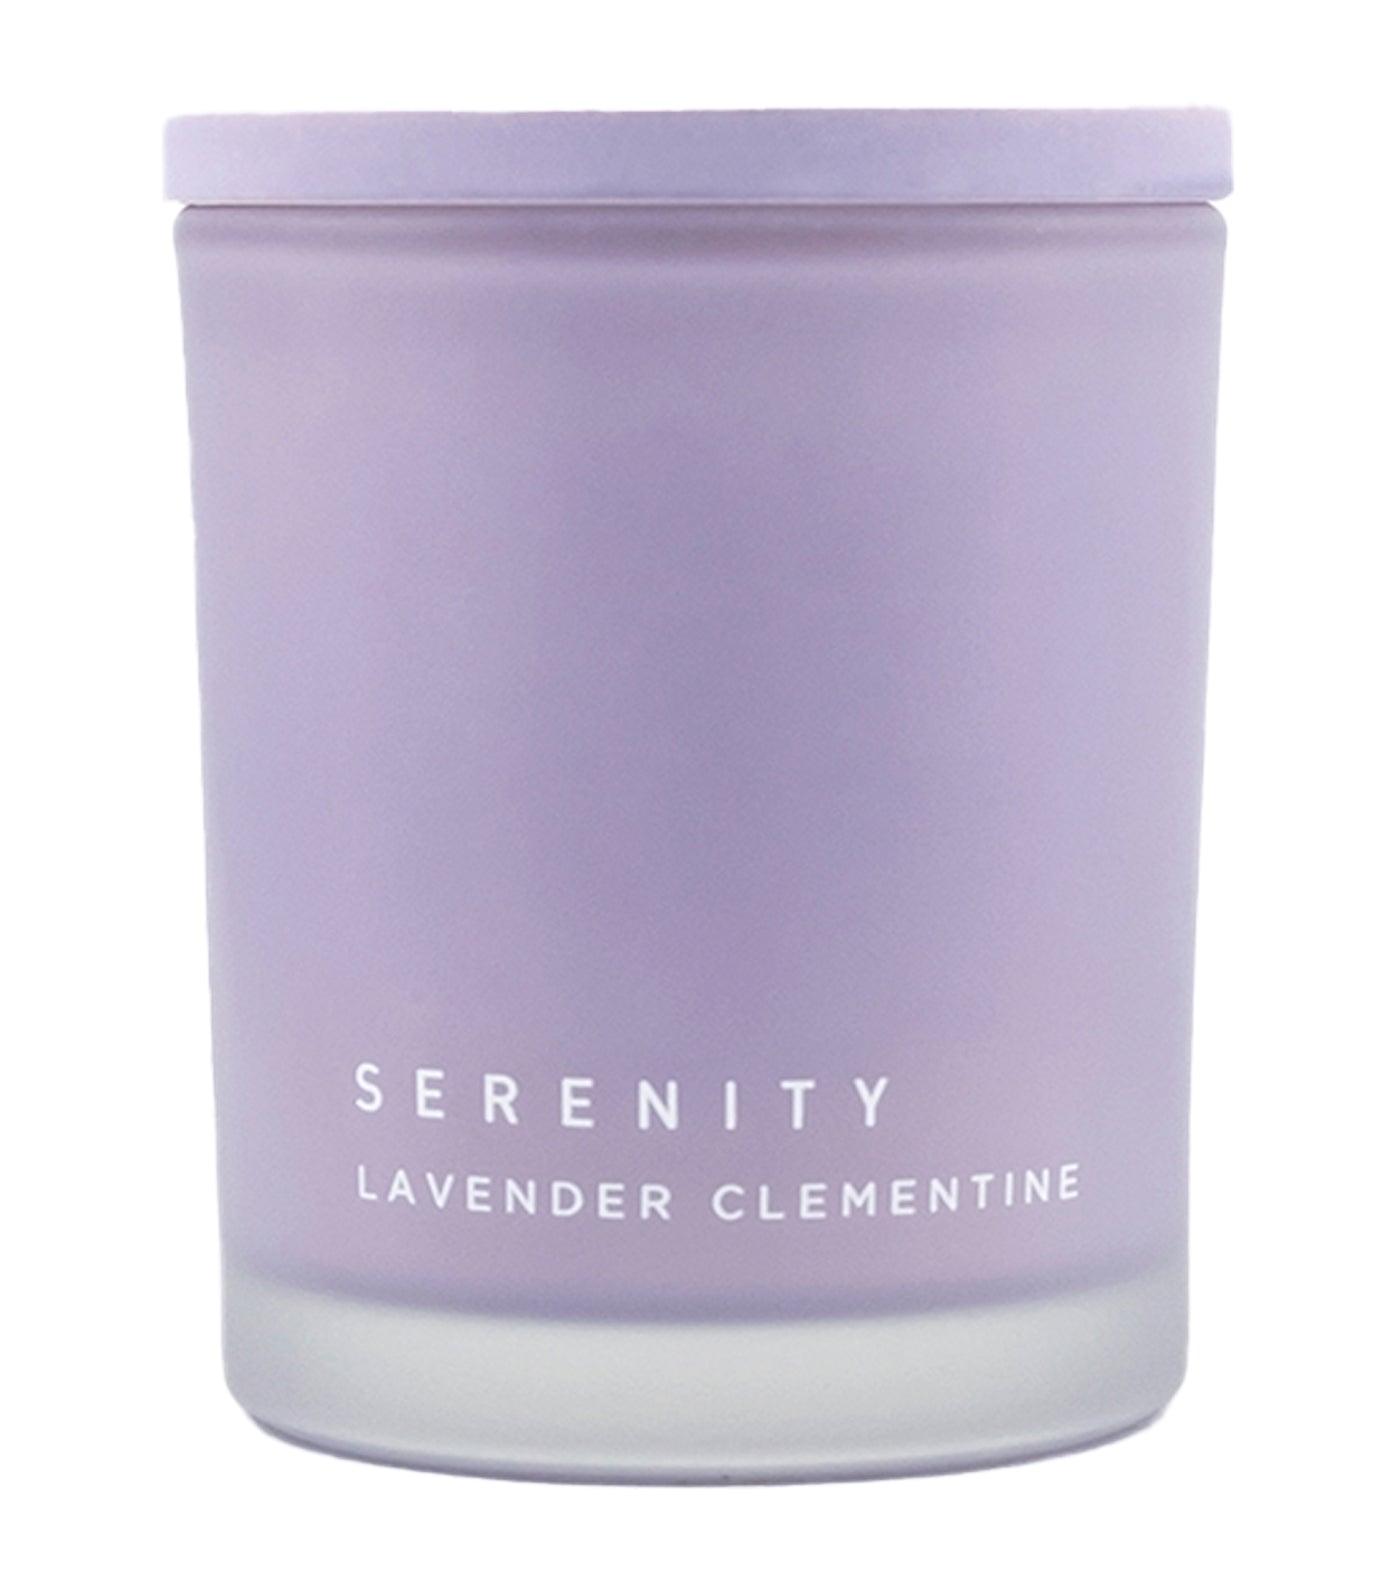 serenity lavender clementine soy wax candle